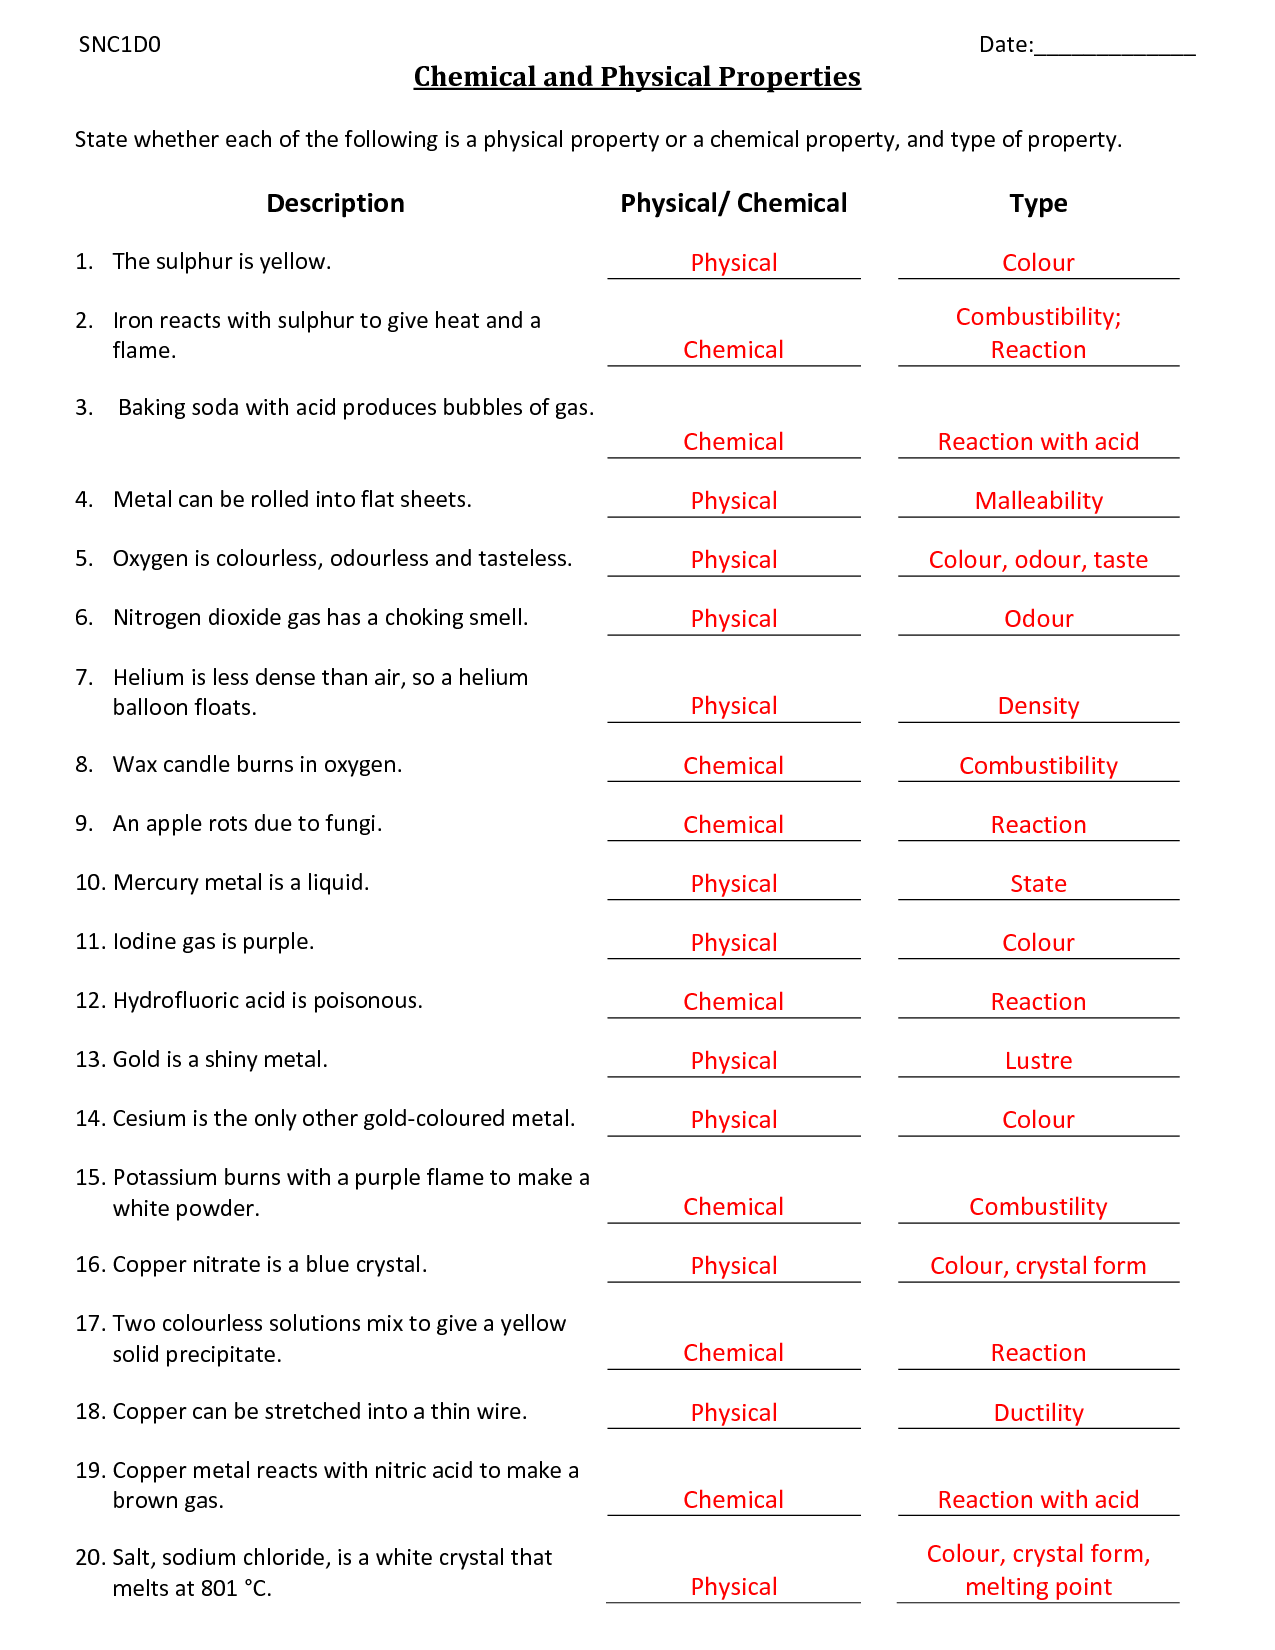 Worksheet On Chemical Vs Physical Properties And Changes Answer